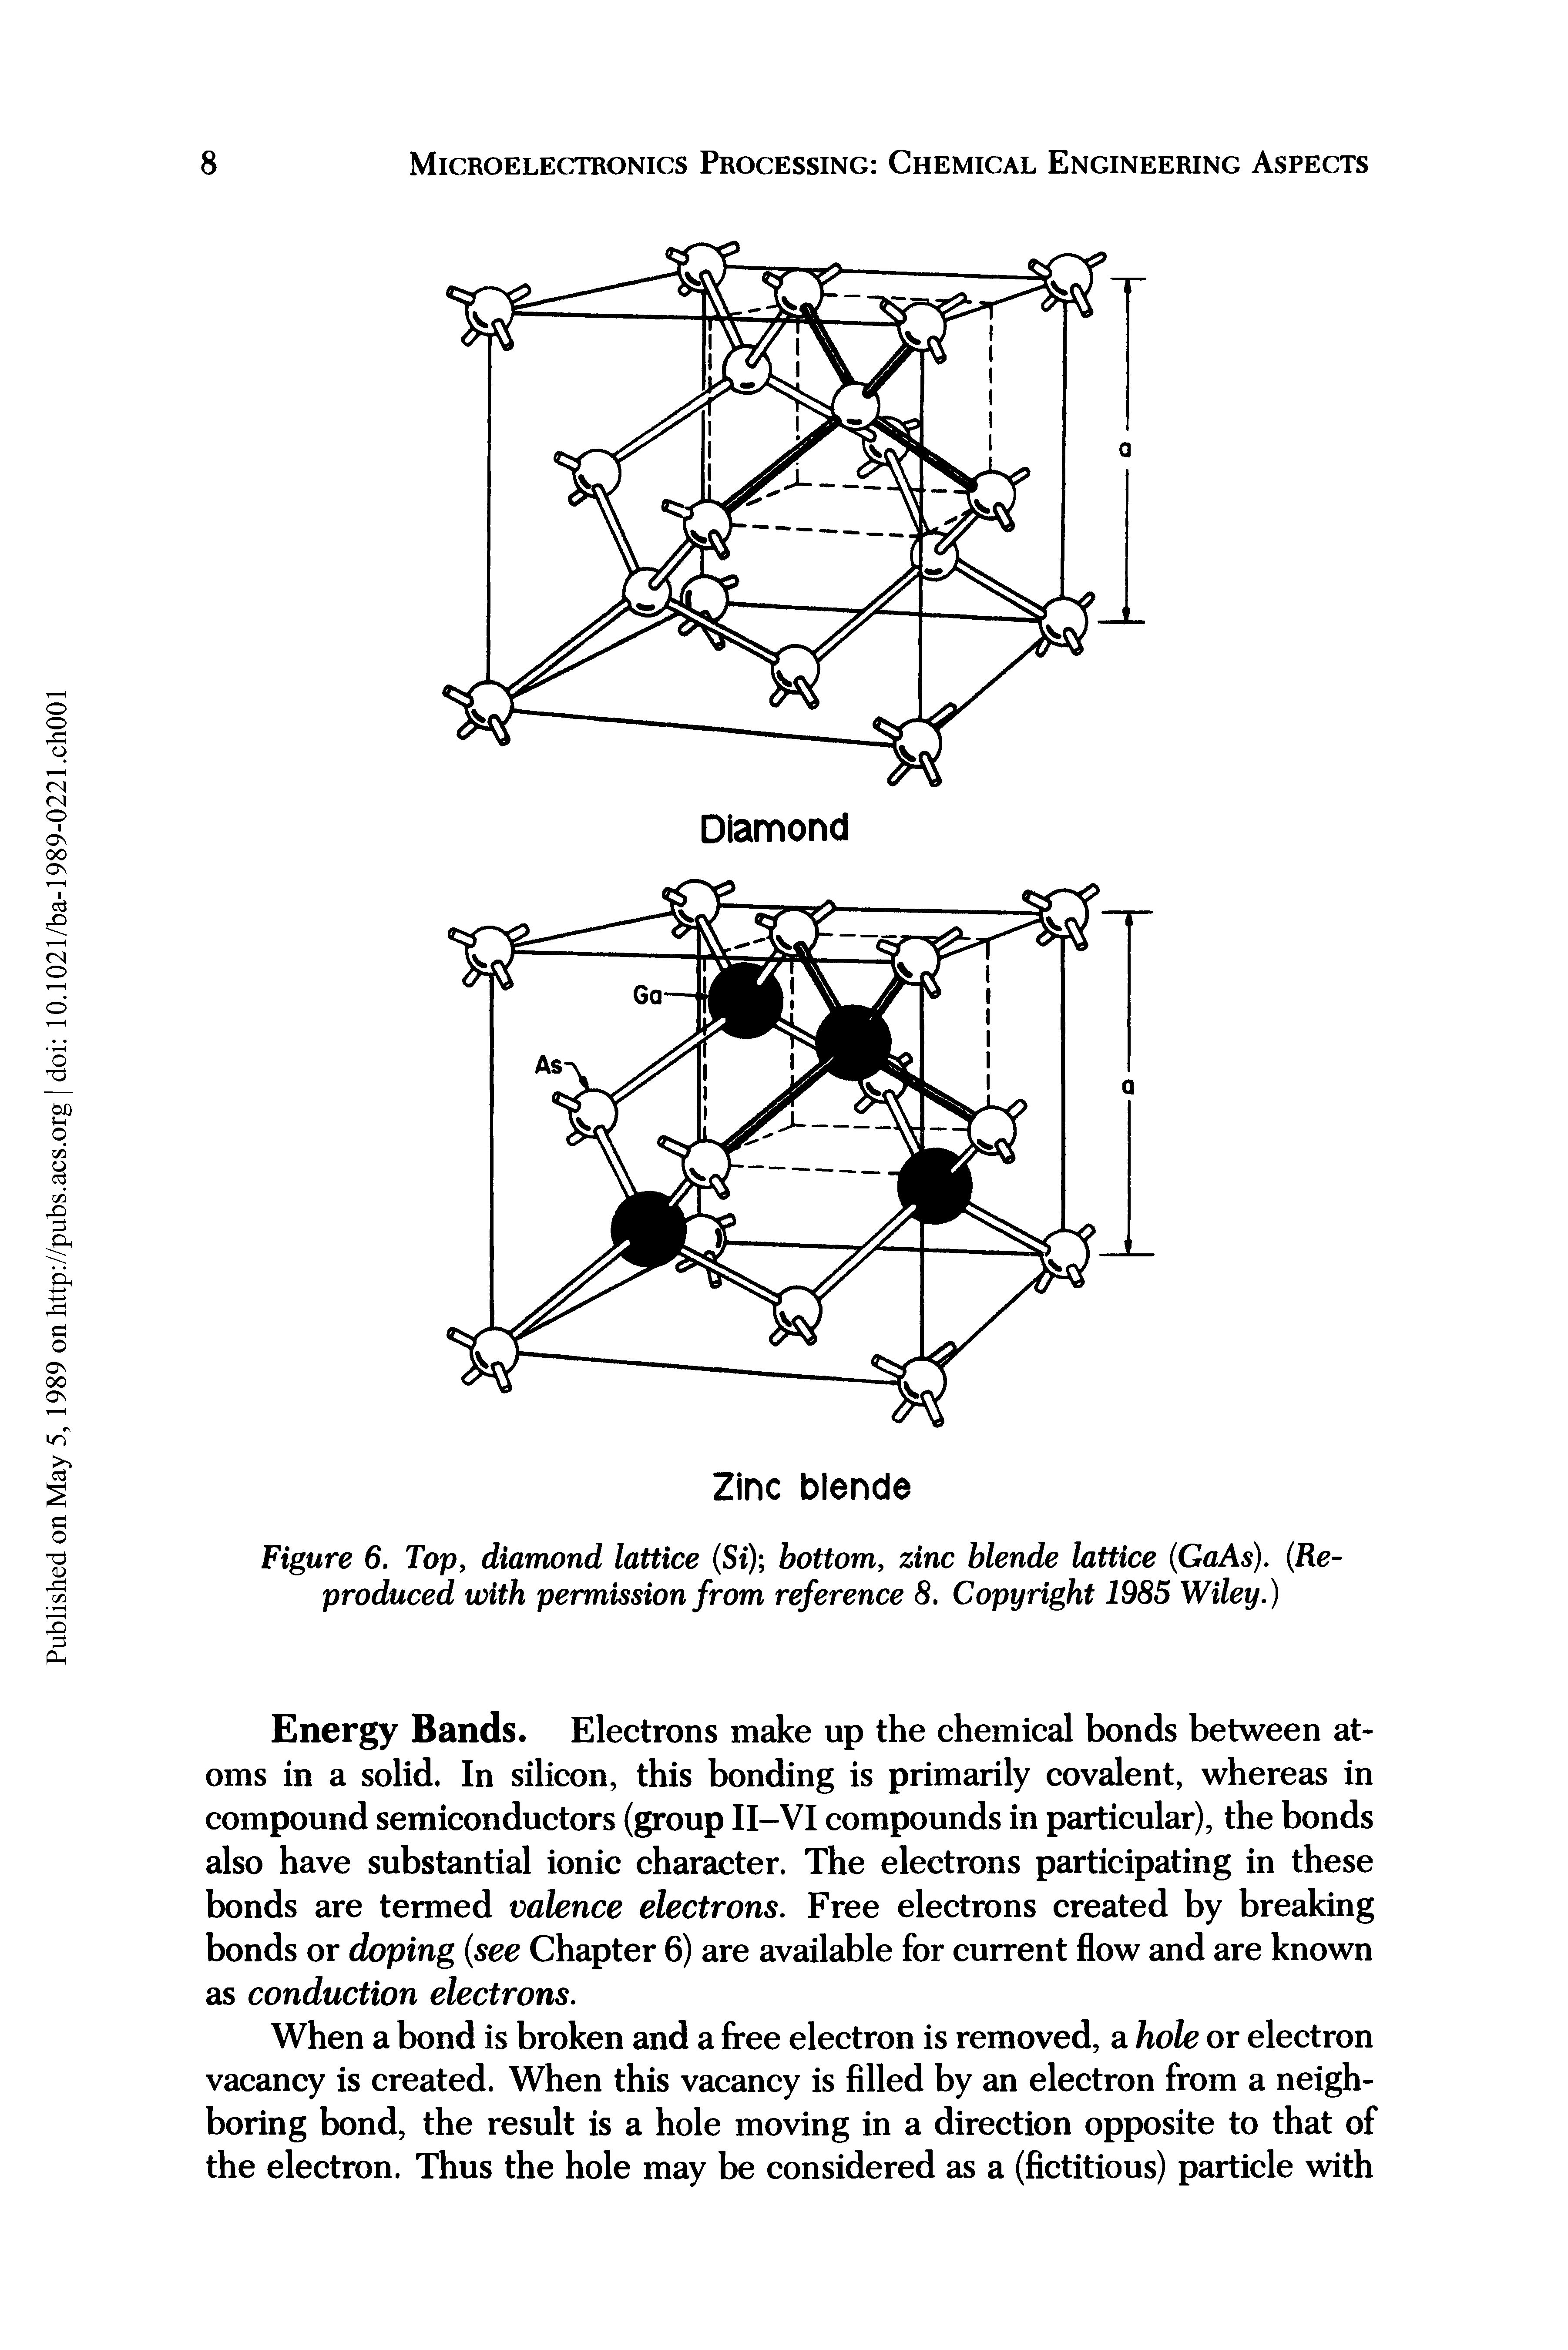 Figure 6. Top, diamond lattice (Si) bottom, zinc blende lattice (GaAs). (Reproduced with permission from reference 8. Copyright 1985 Wiley.)...